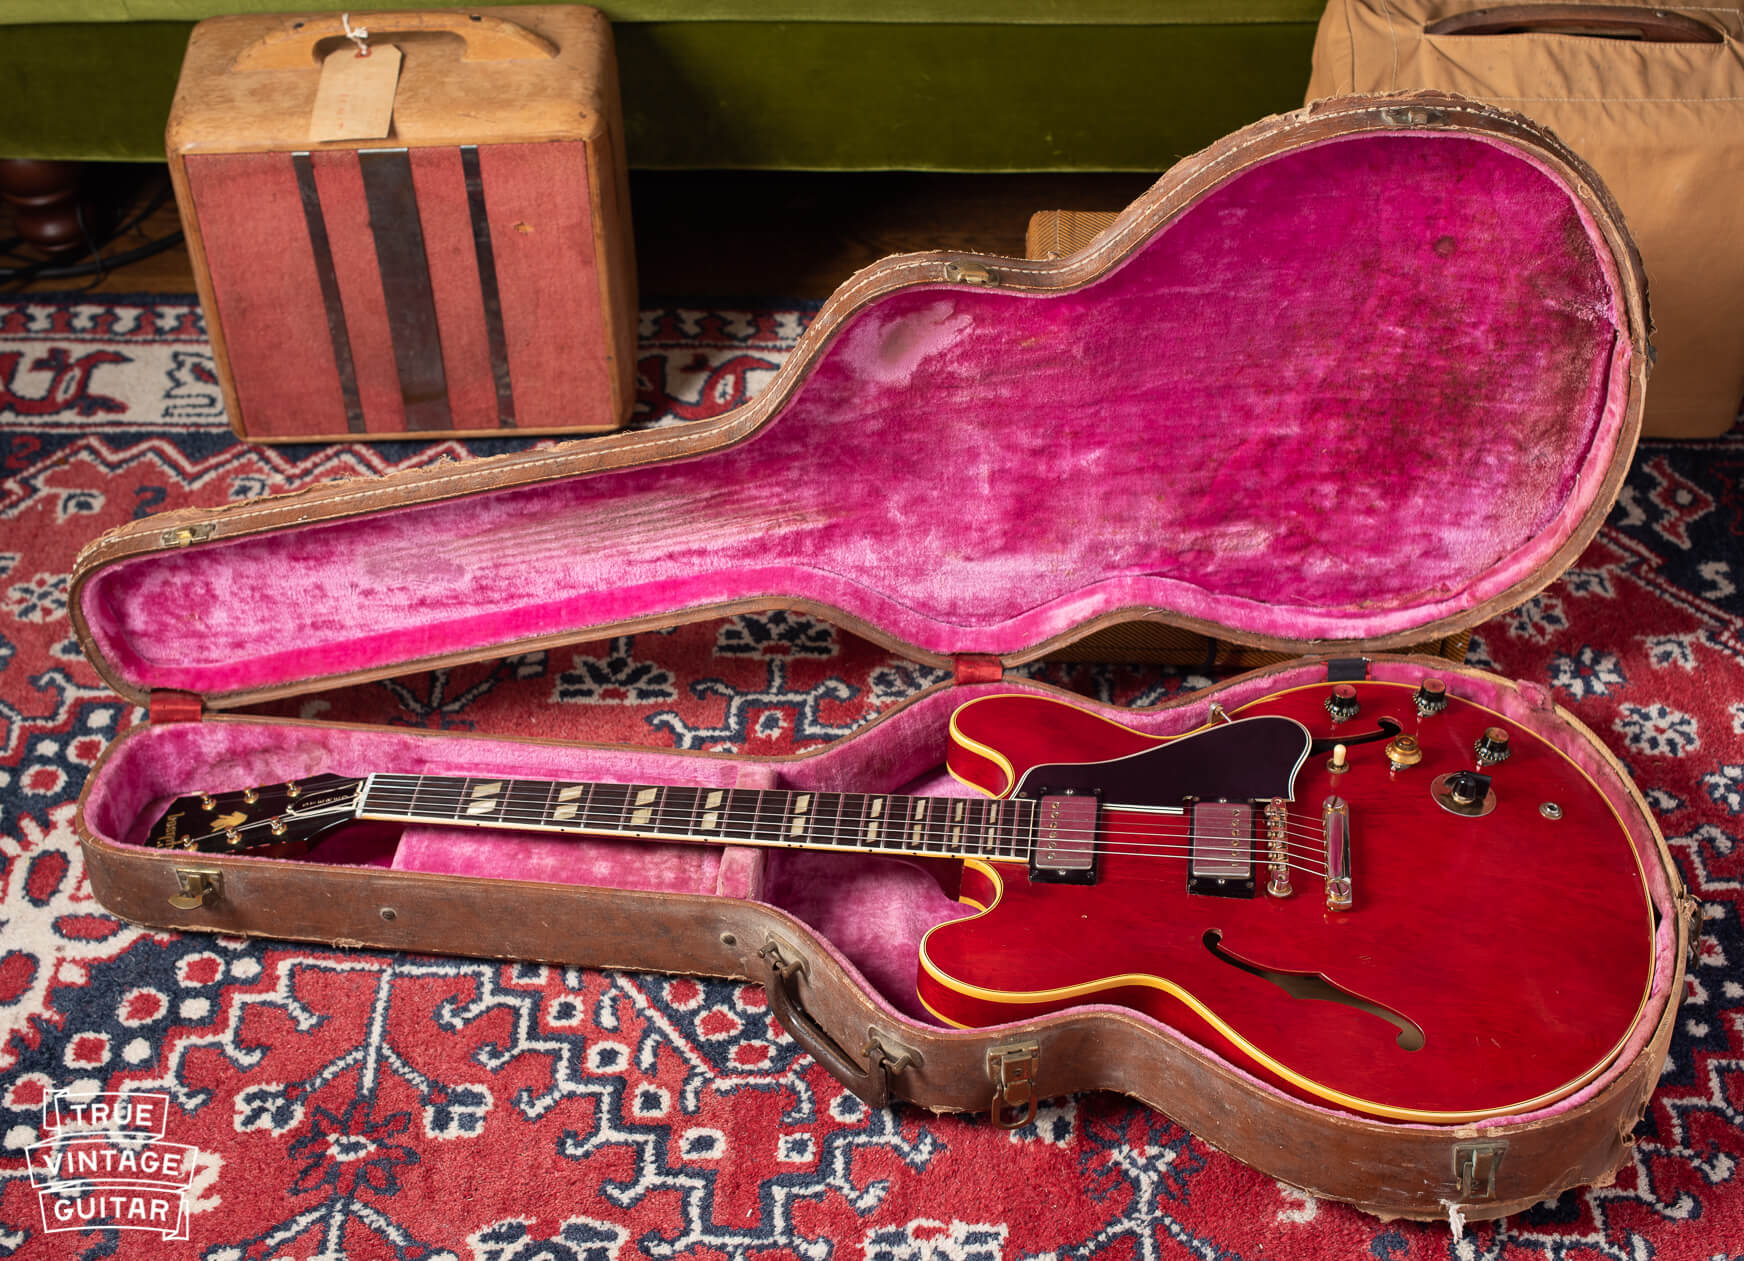 1960 Gibson ES-345 guitar with red finish in brown and pink original case